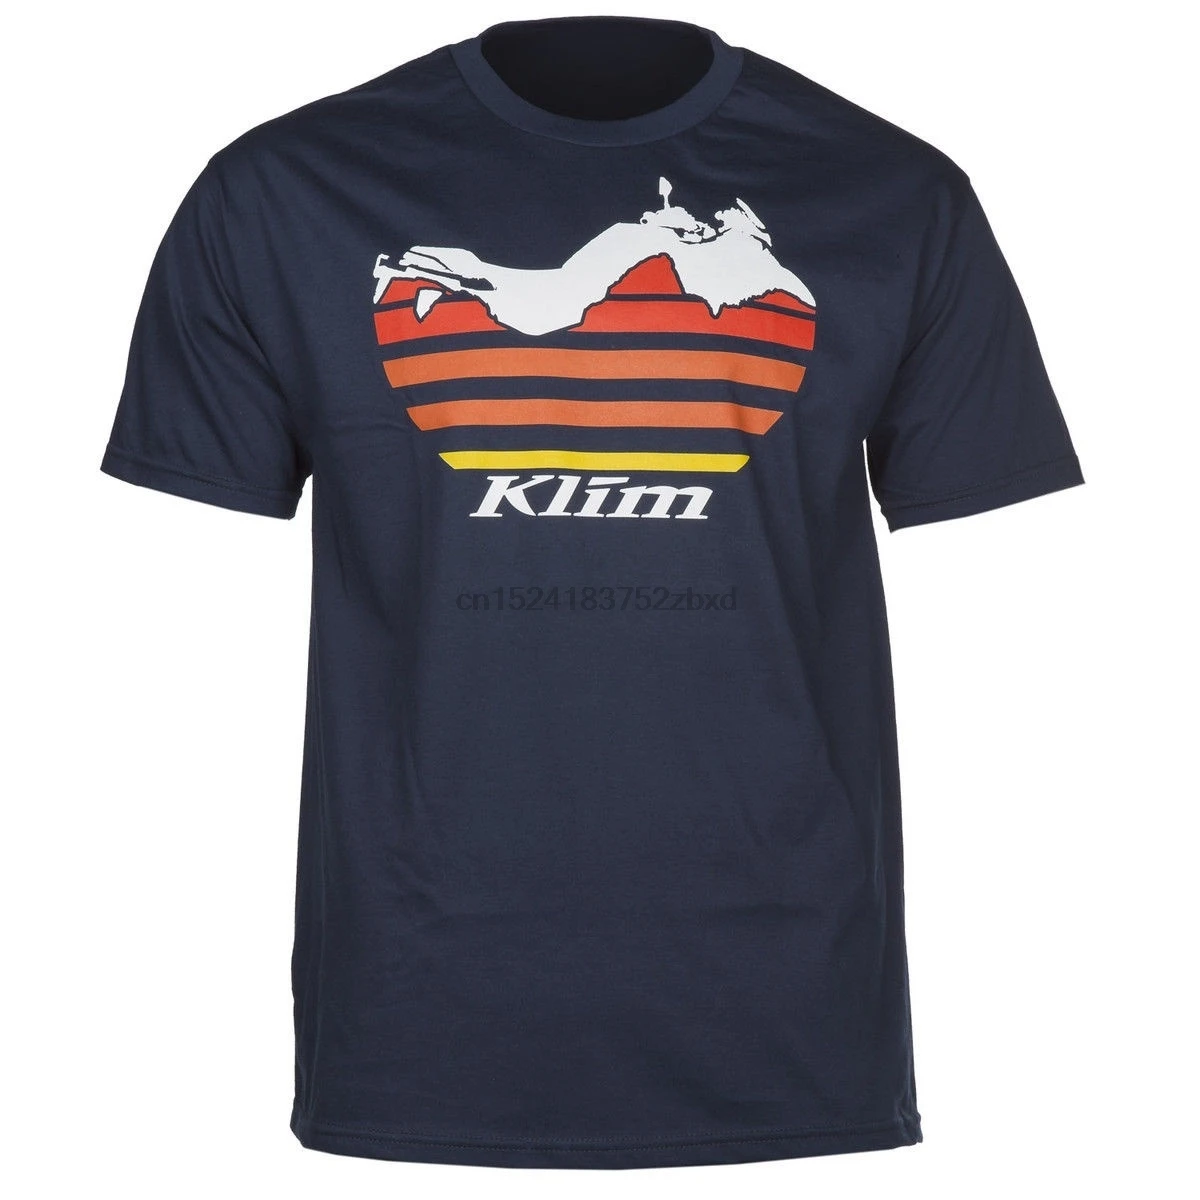 Klim Within Range T shirt New Mens Casual T Shirt-in T